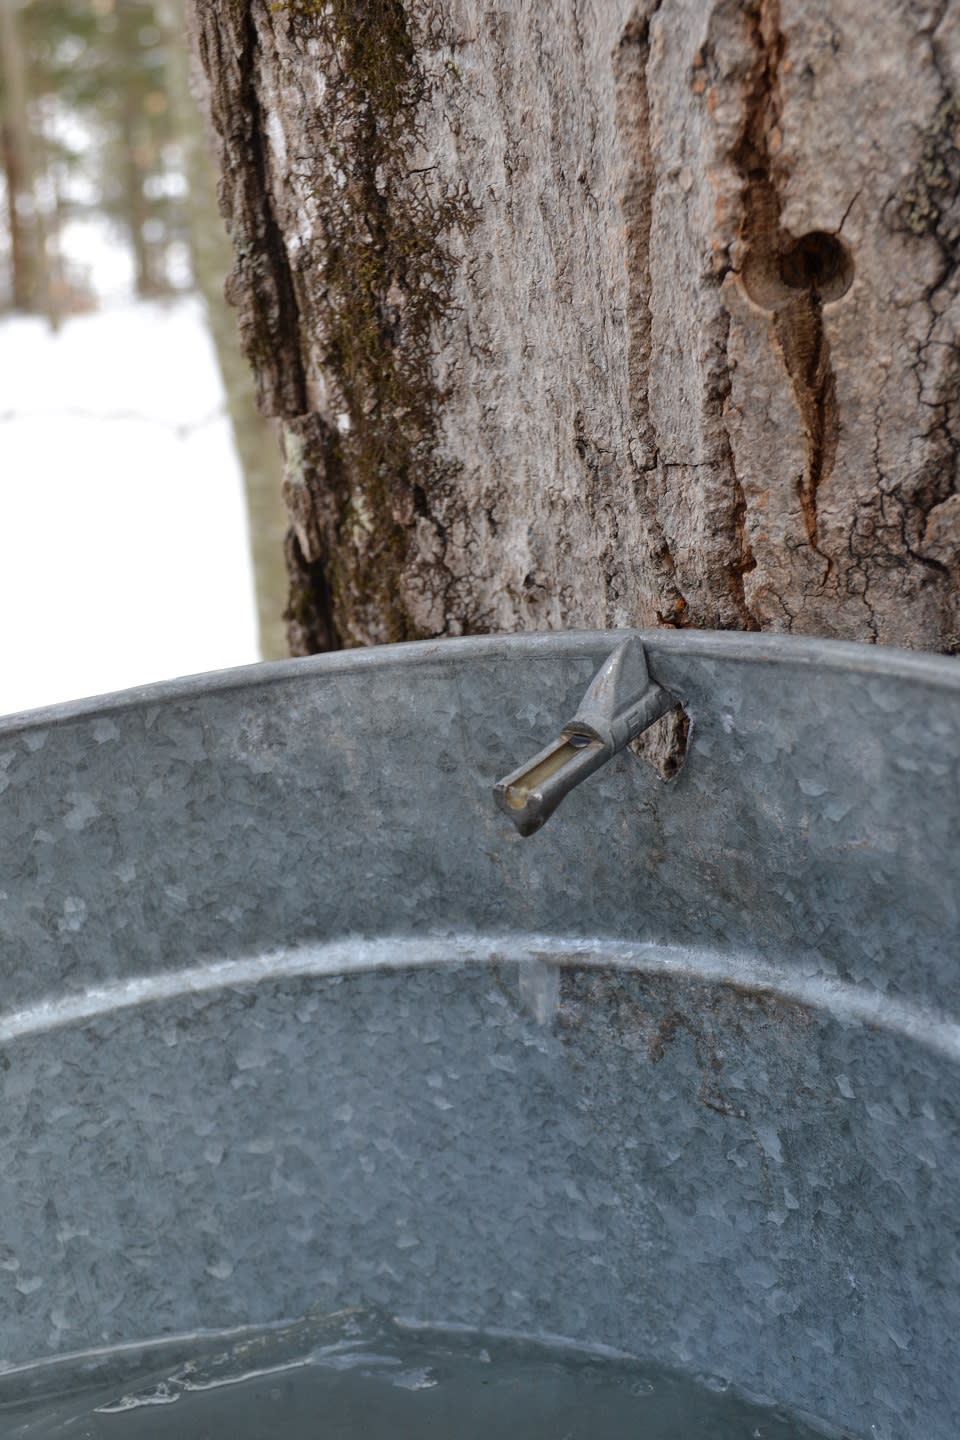 Close up of a tap in a maple tree draining into a metal collection bucket